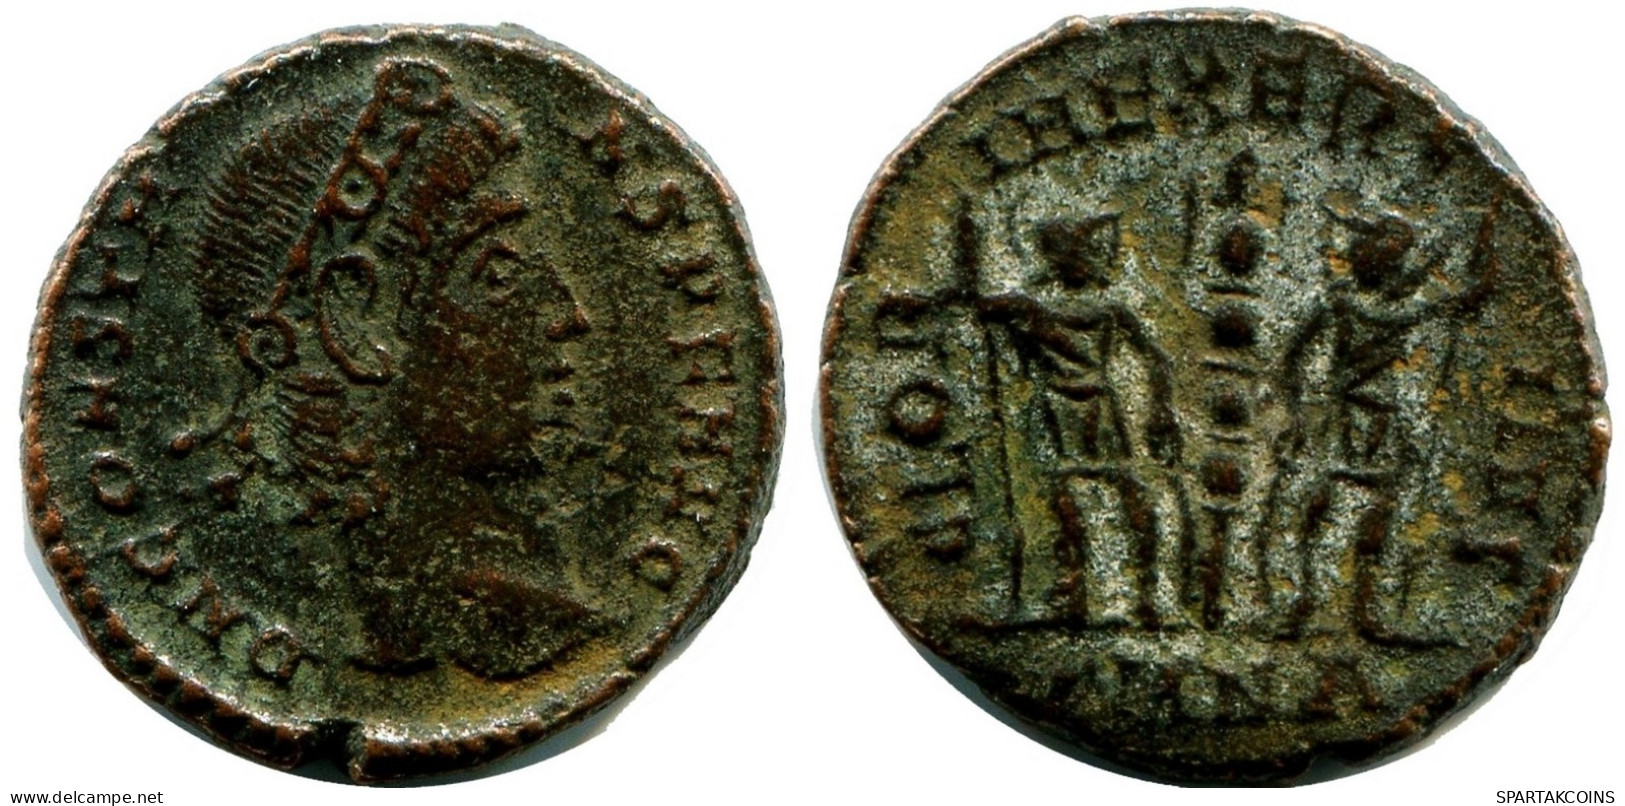 CONSTANS MINTED IN NICOMEDIA FOUND IN IHNASYAH HOARD EGYPT #ANC11791.14.F.A - El Impero Christiano (307 / 363)